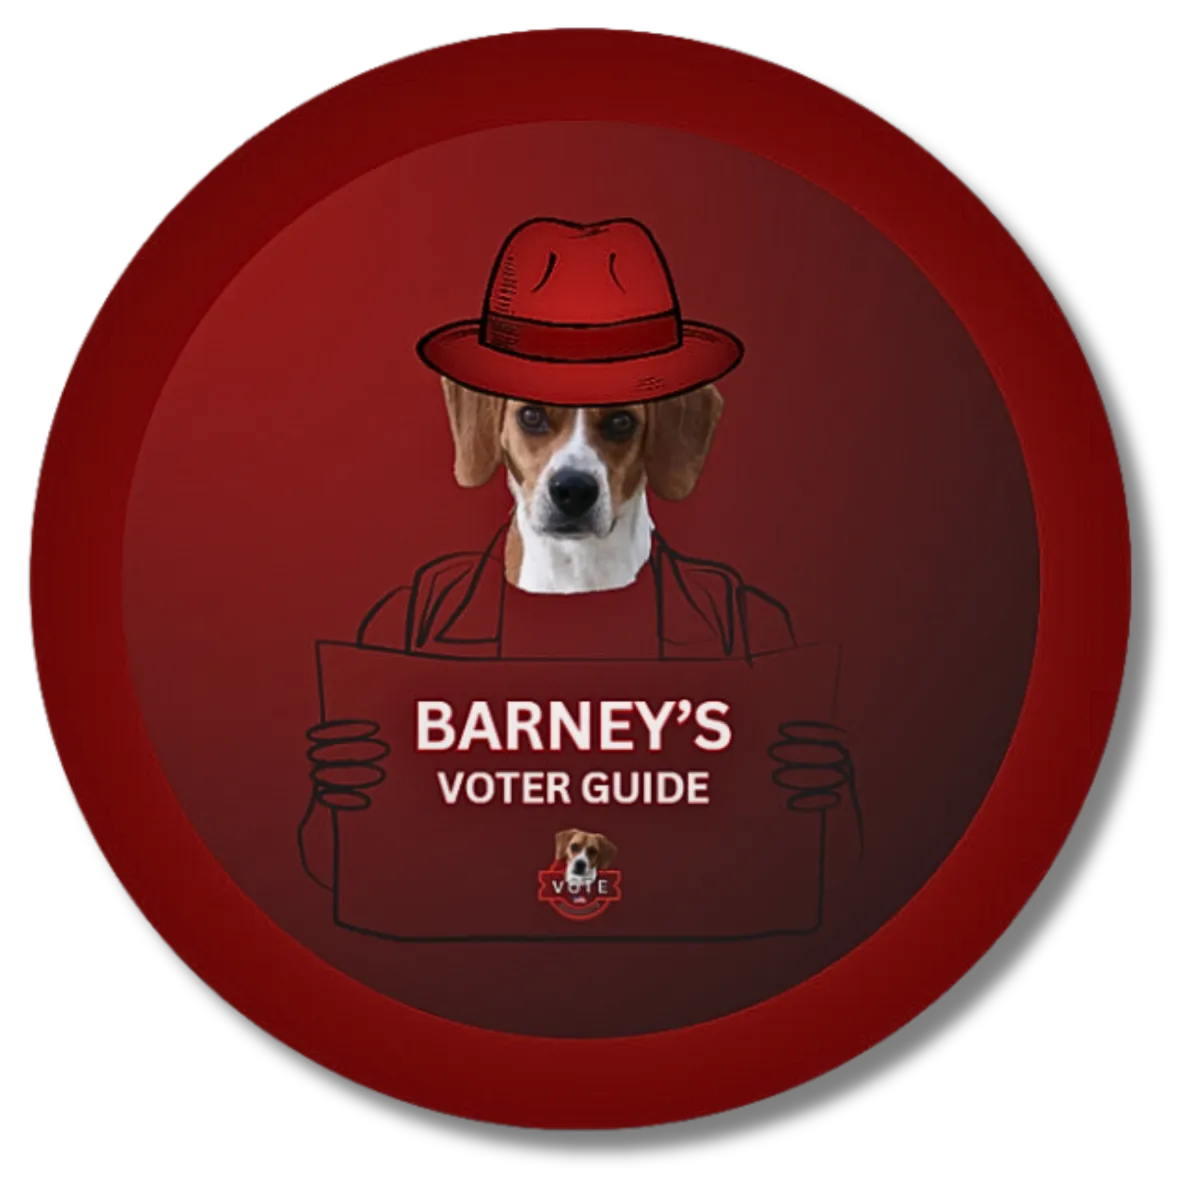 BARNEYS VOTER GUIDE_ VOTE GRASSROOTS